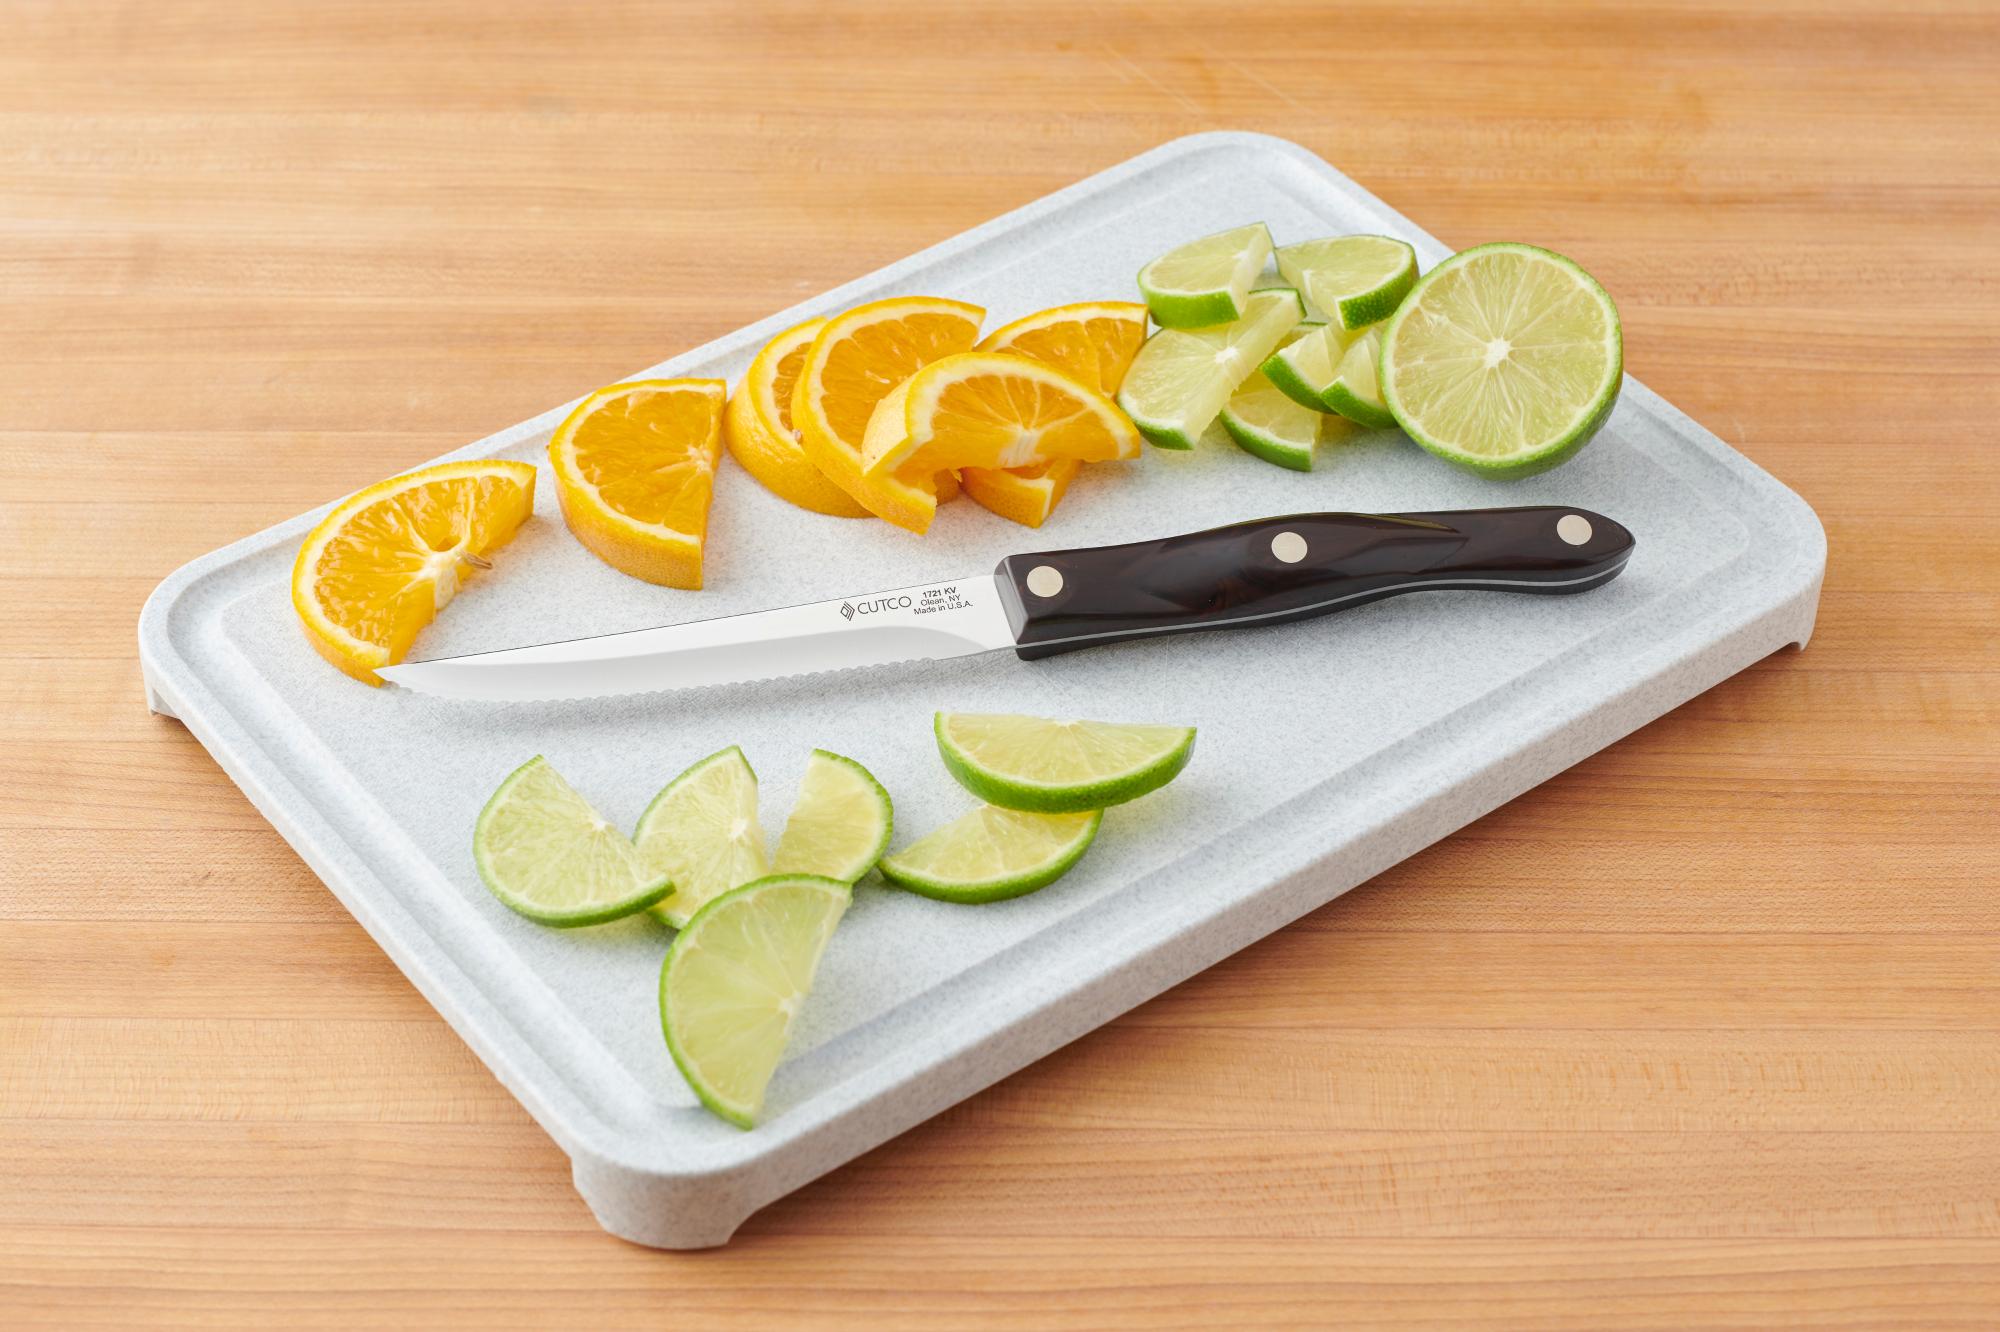 The Trimmer is perfect for slicing the citrus.